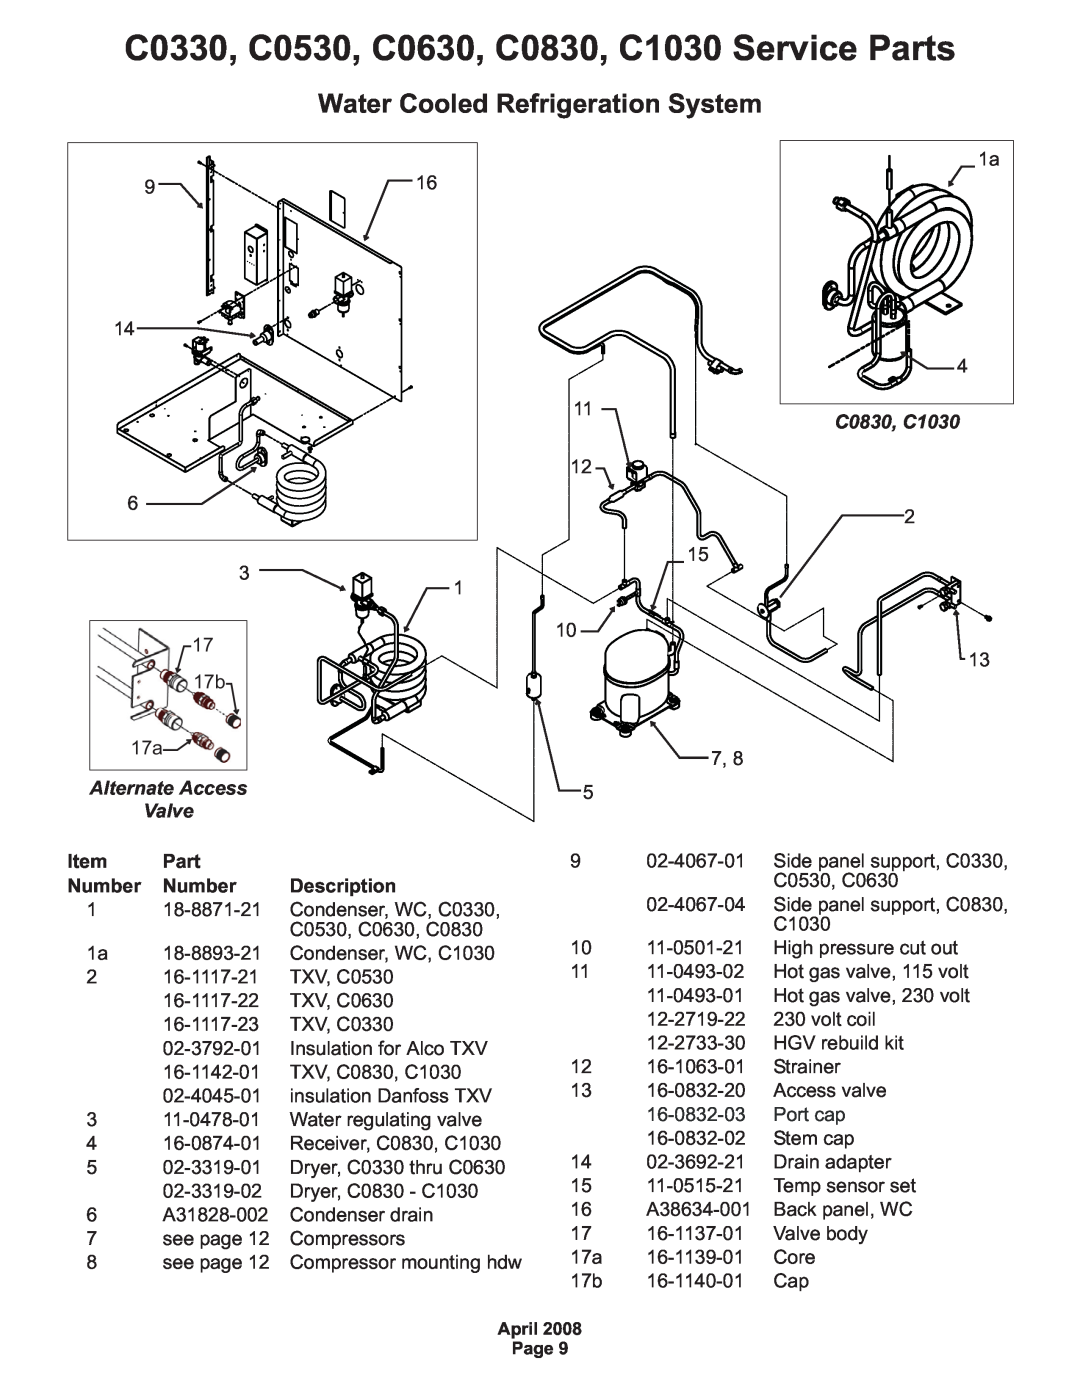 Scotsman Ice C0530 Water Cooled Refrigeration System, Alternate Access, Valve, C0830, C1030, Part, Number, 16-0832-03 